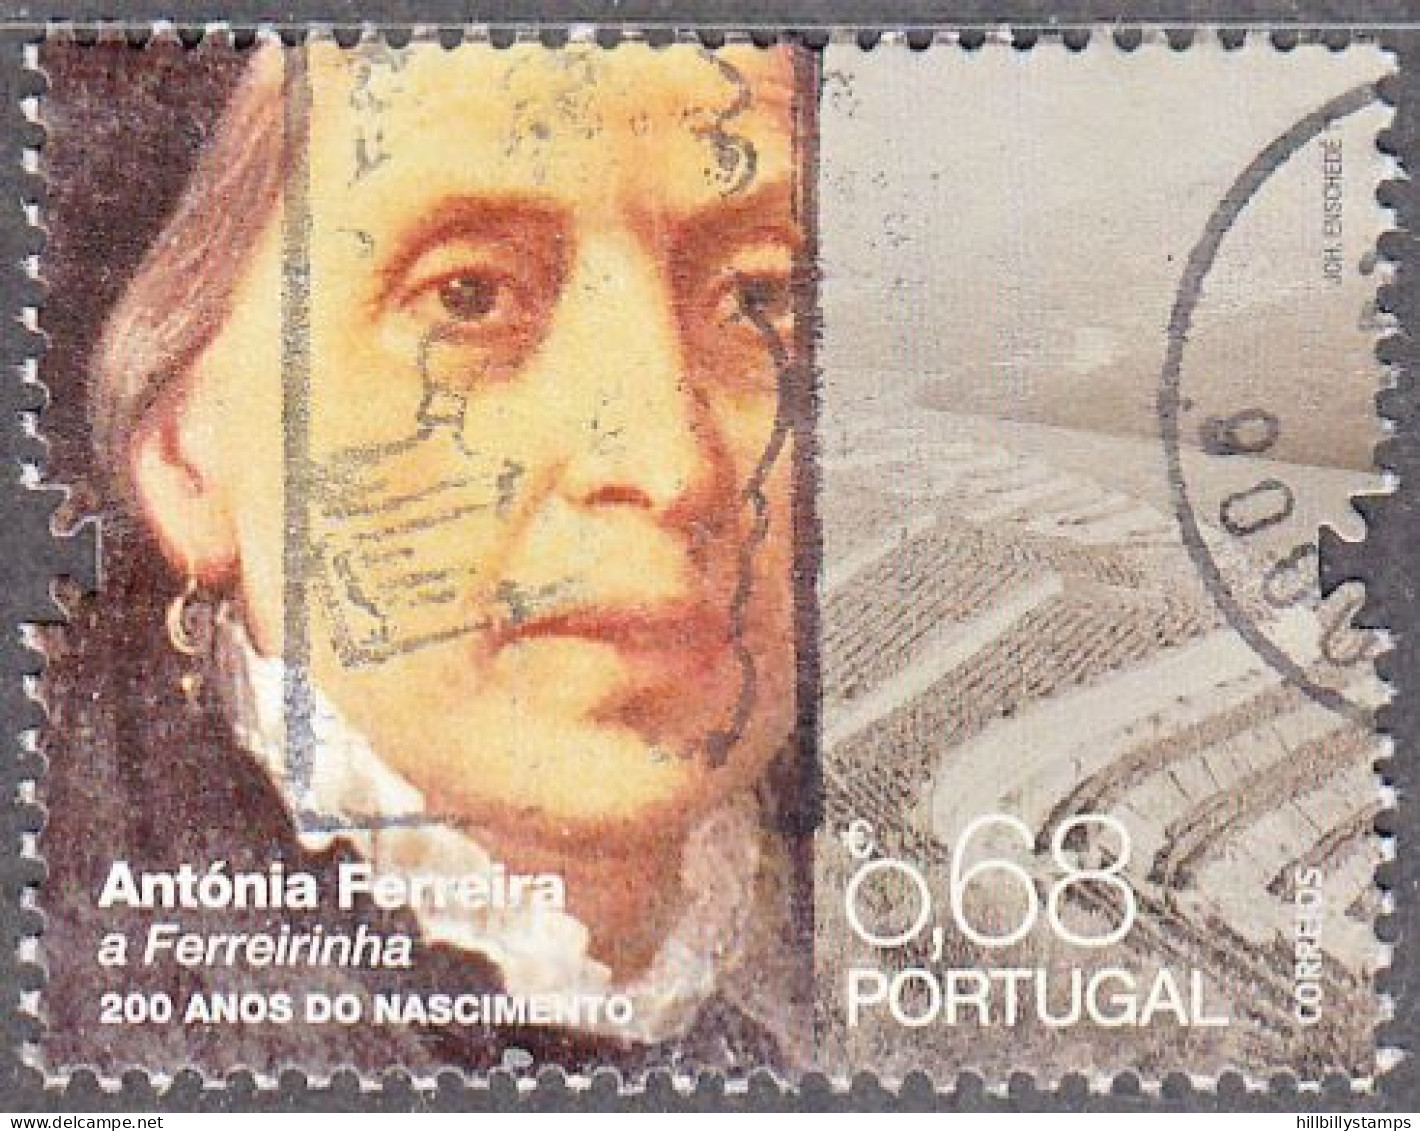 PORTUGAL    SCOTT NO 3291  USED  YEAR 2011 - Used Stamps